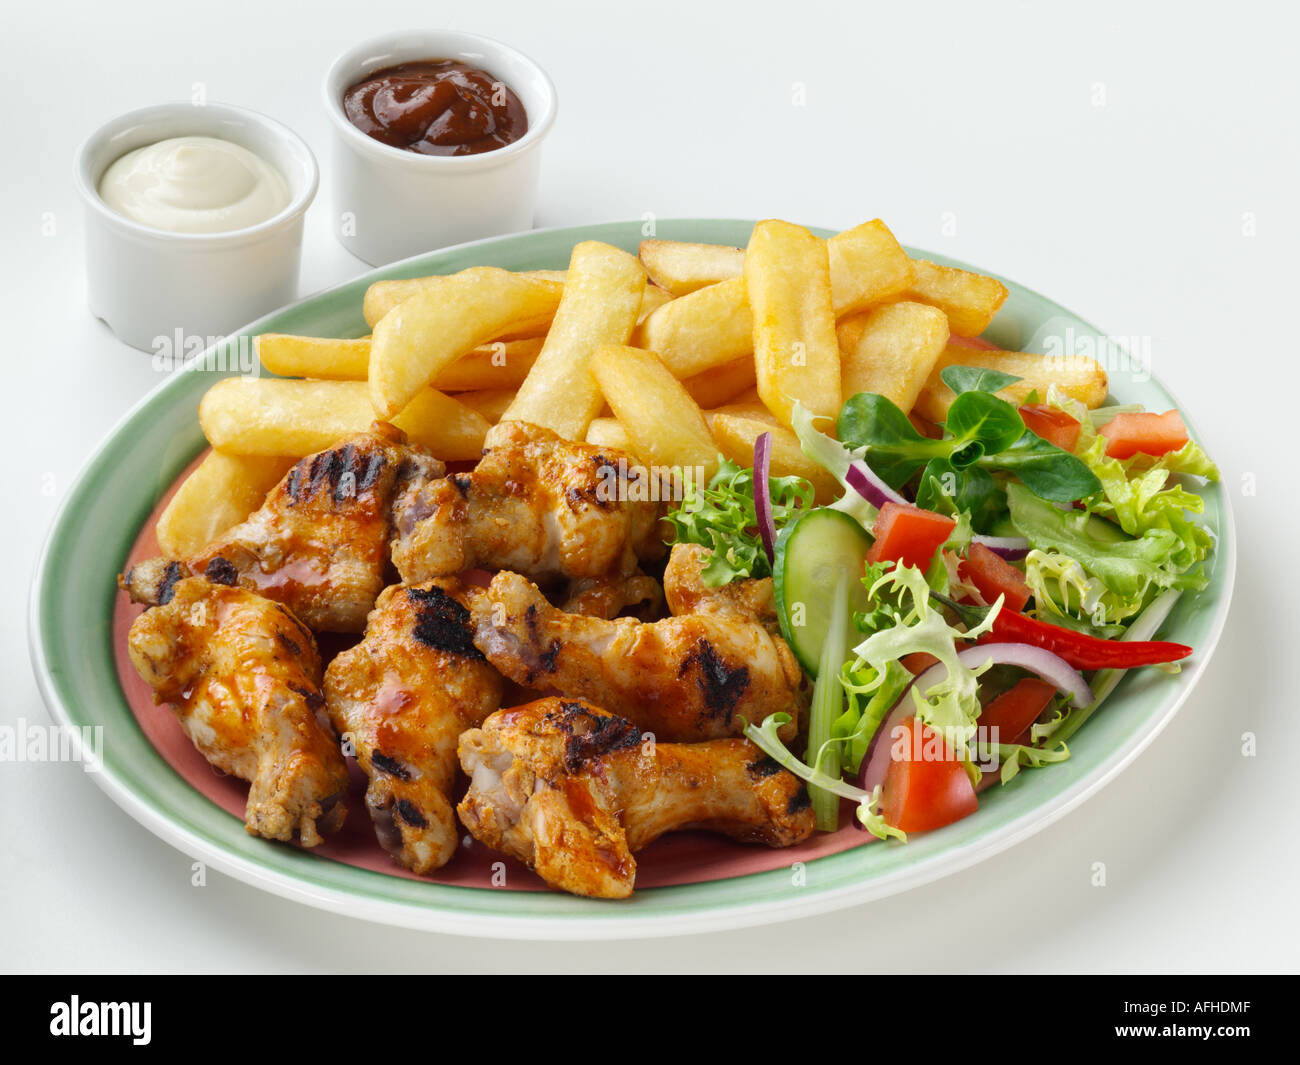 Chicken wings French fries and salad Stock Photo - Alamy